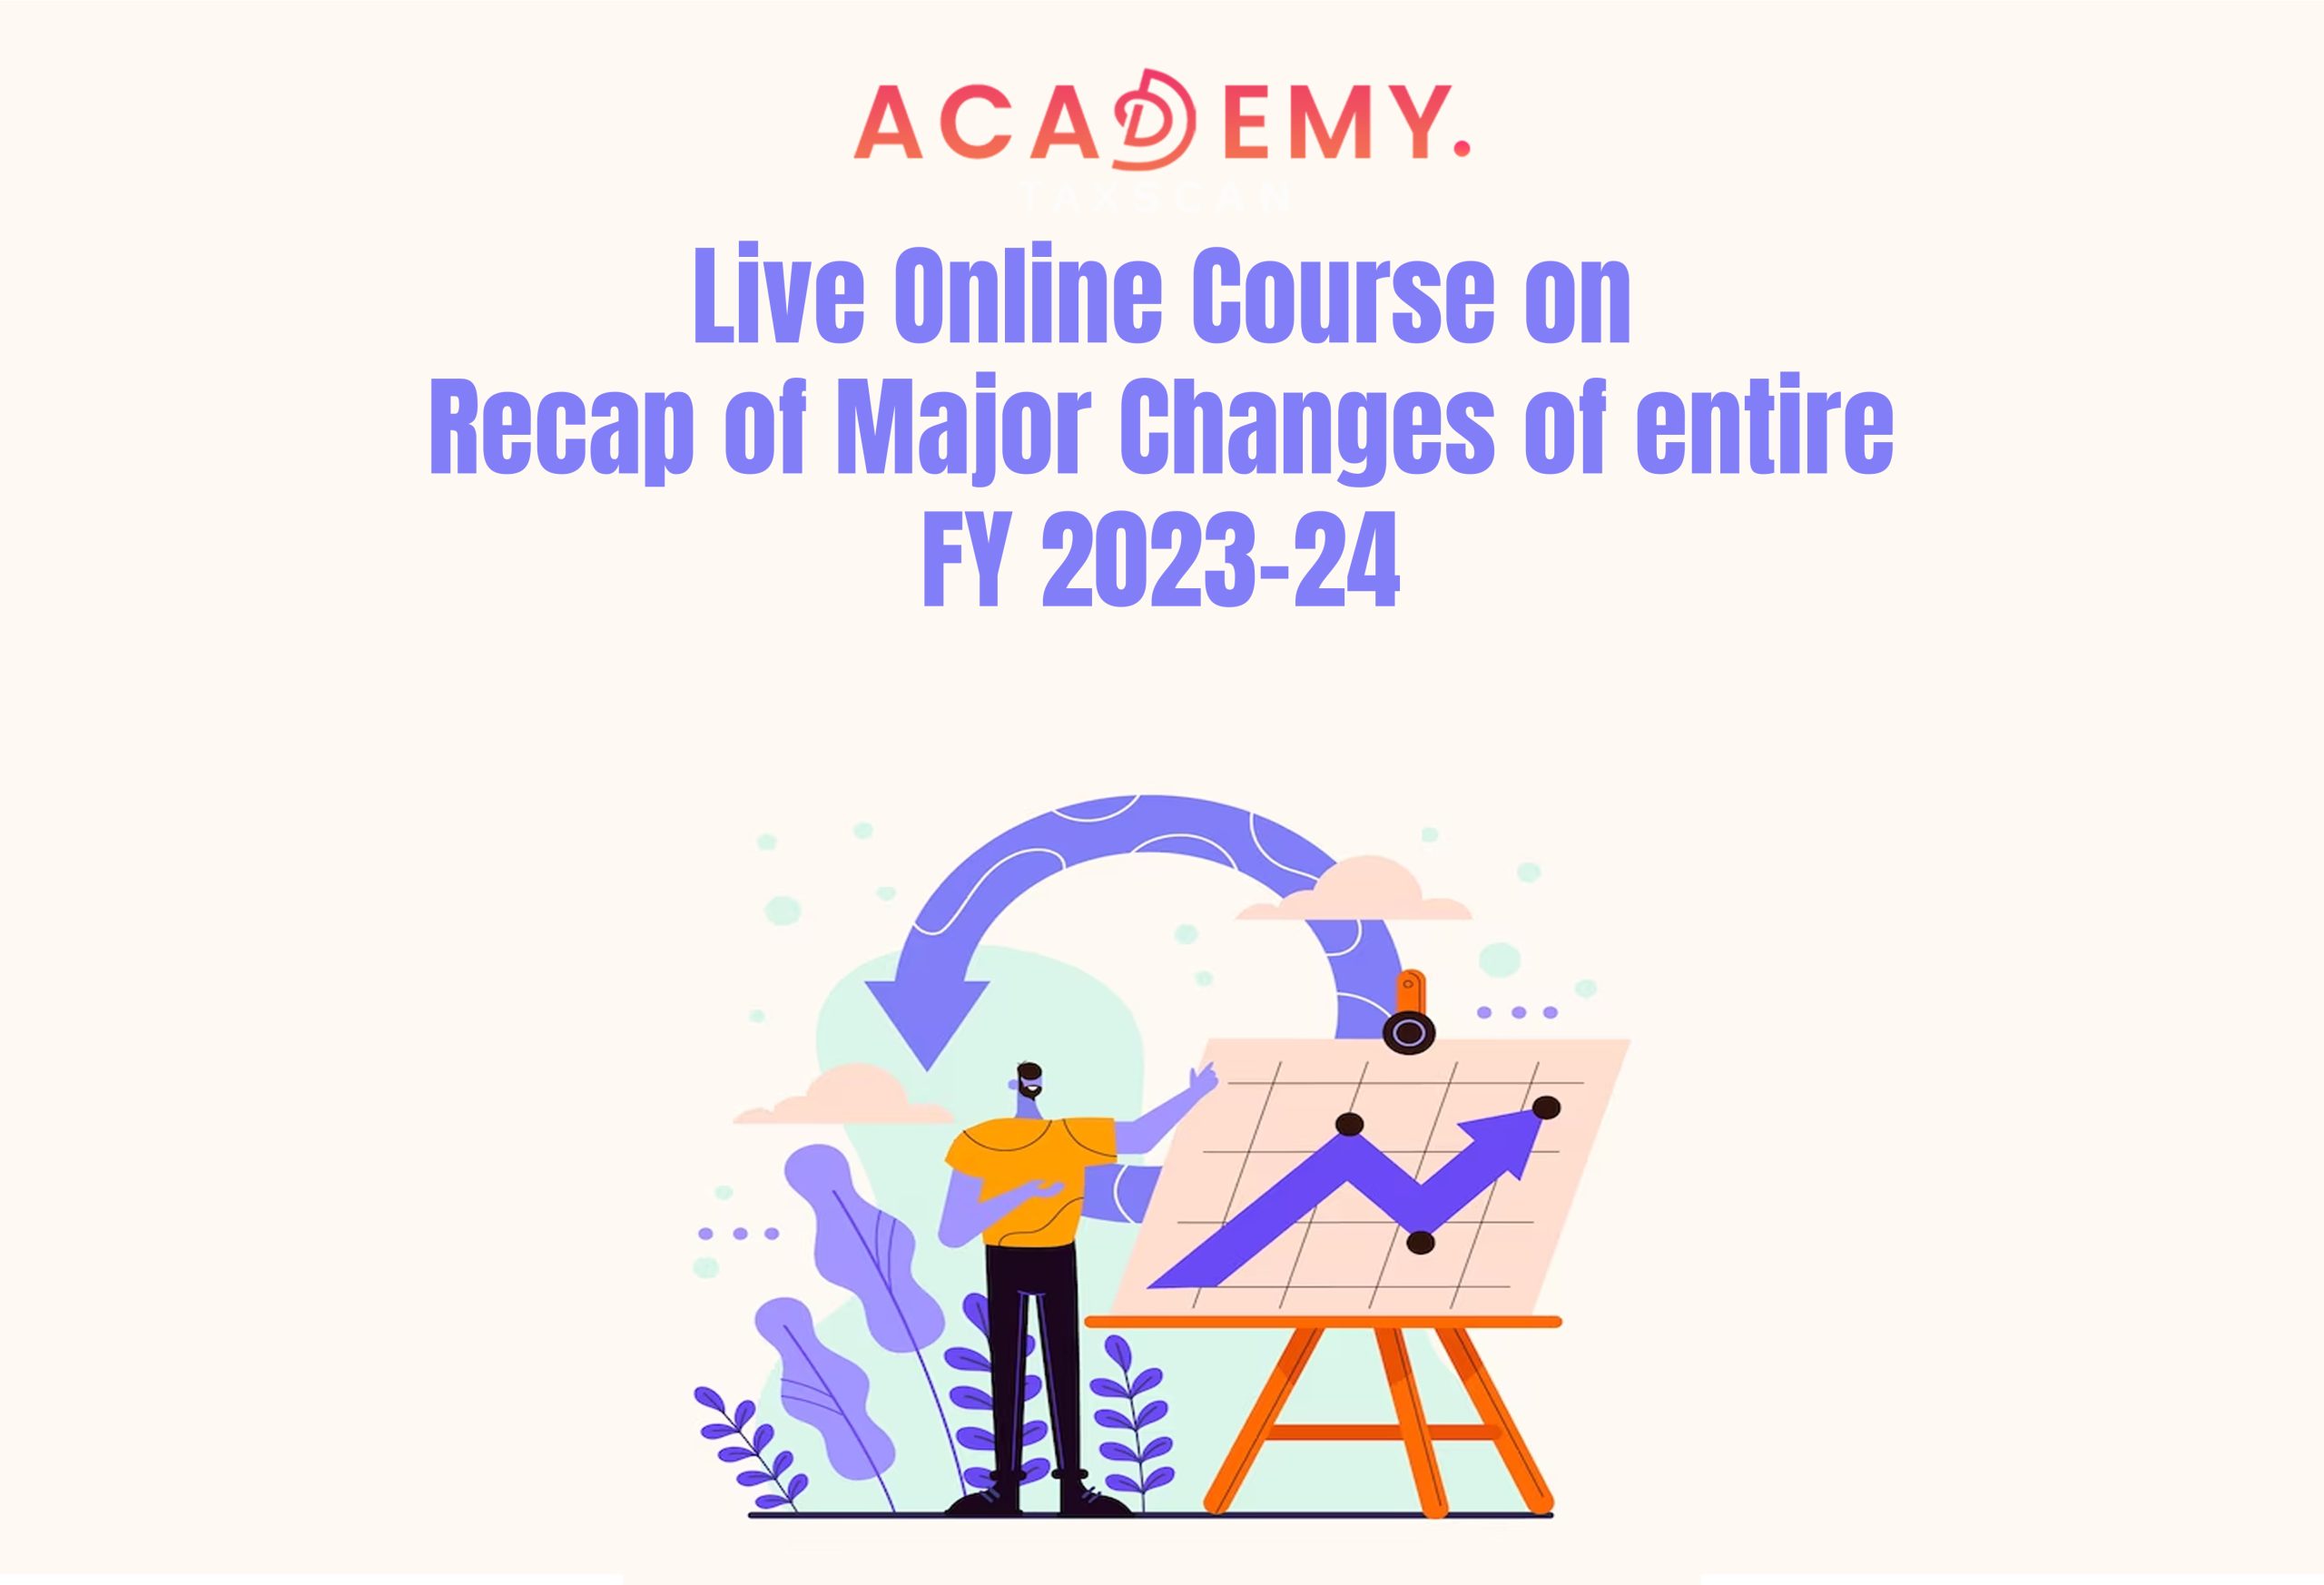 Major Changes of entire FY 2023-24 - Online Course - Live Online Course - GST Law - GST - changes in the GST Law - Finance Act 2023 - Rate related changes - Taxscan Academy